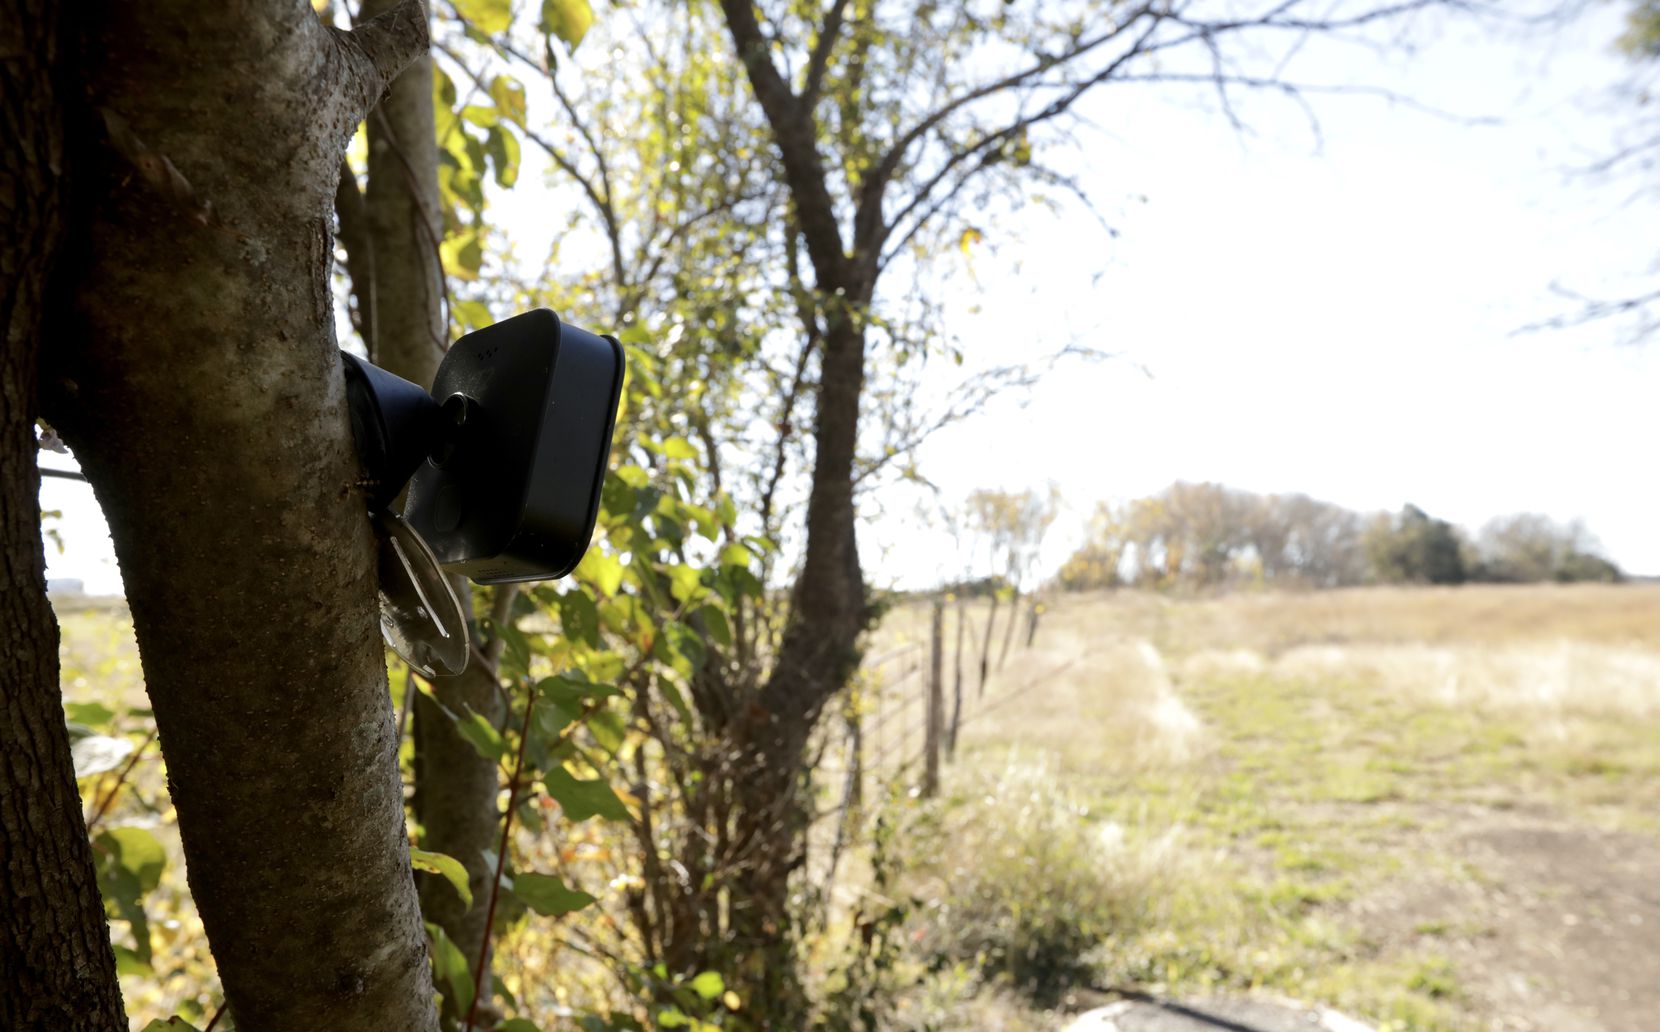 One of several game cameras set up to capture wildlife behind Stephanie Higgins’ home in...